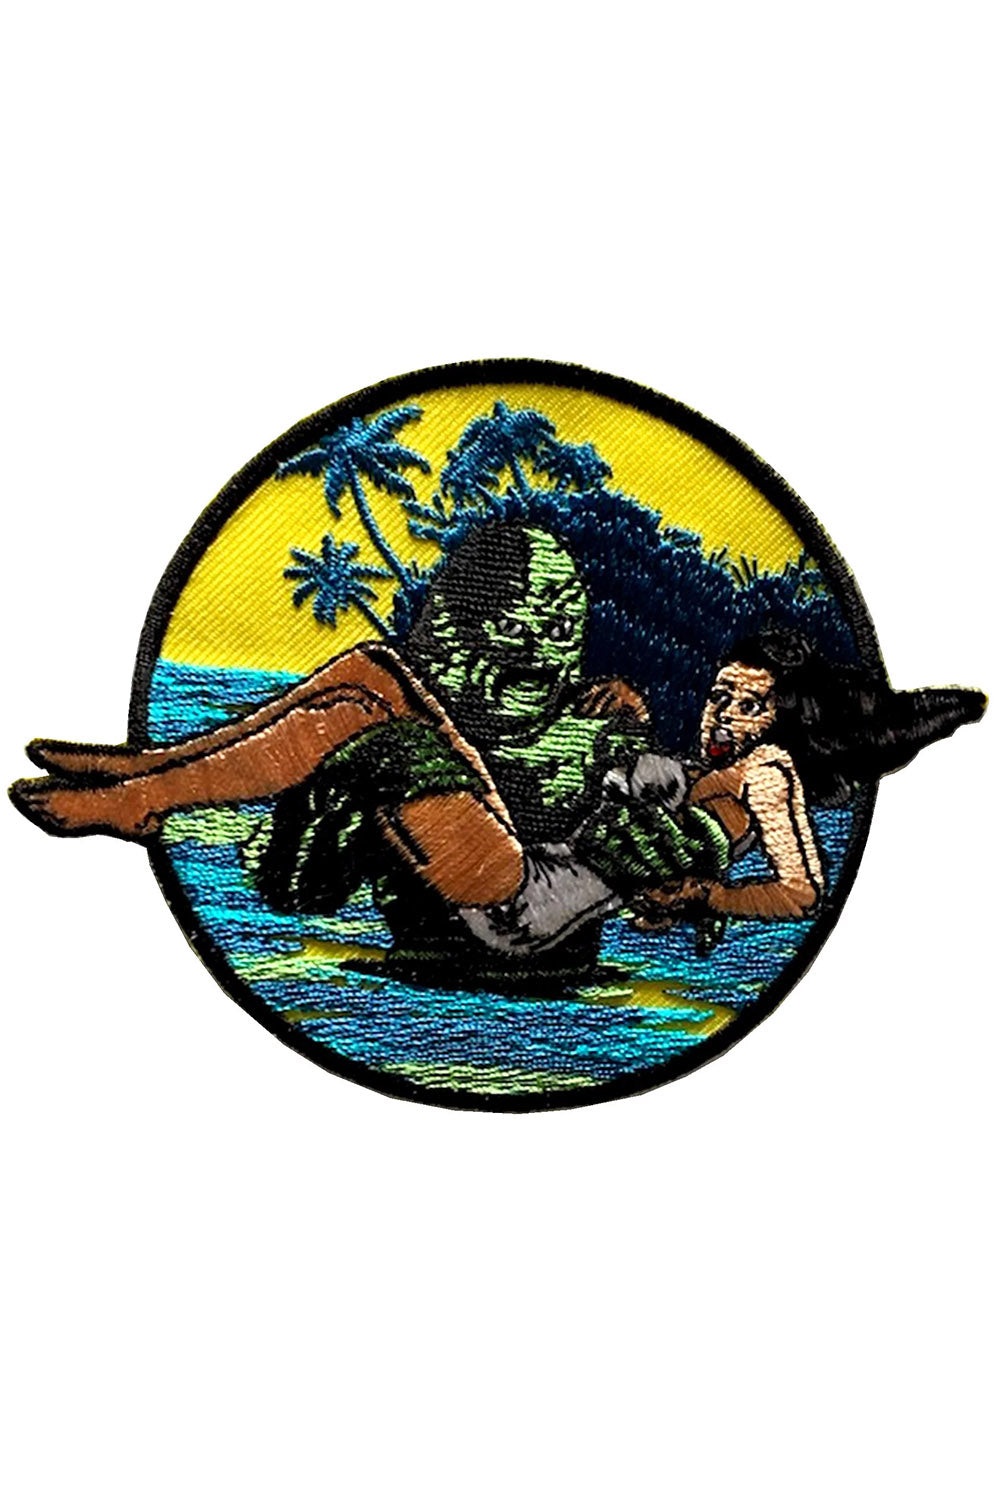 Help! Creature from the Black Lagoon Patch